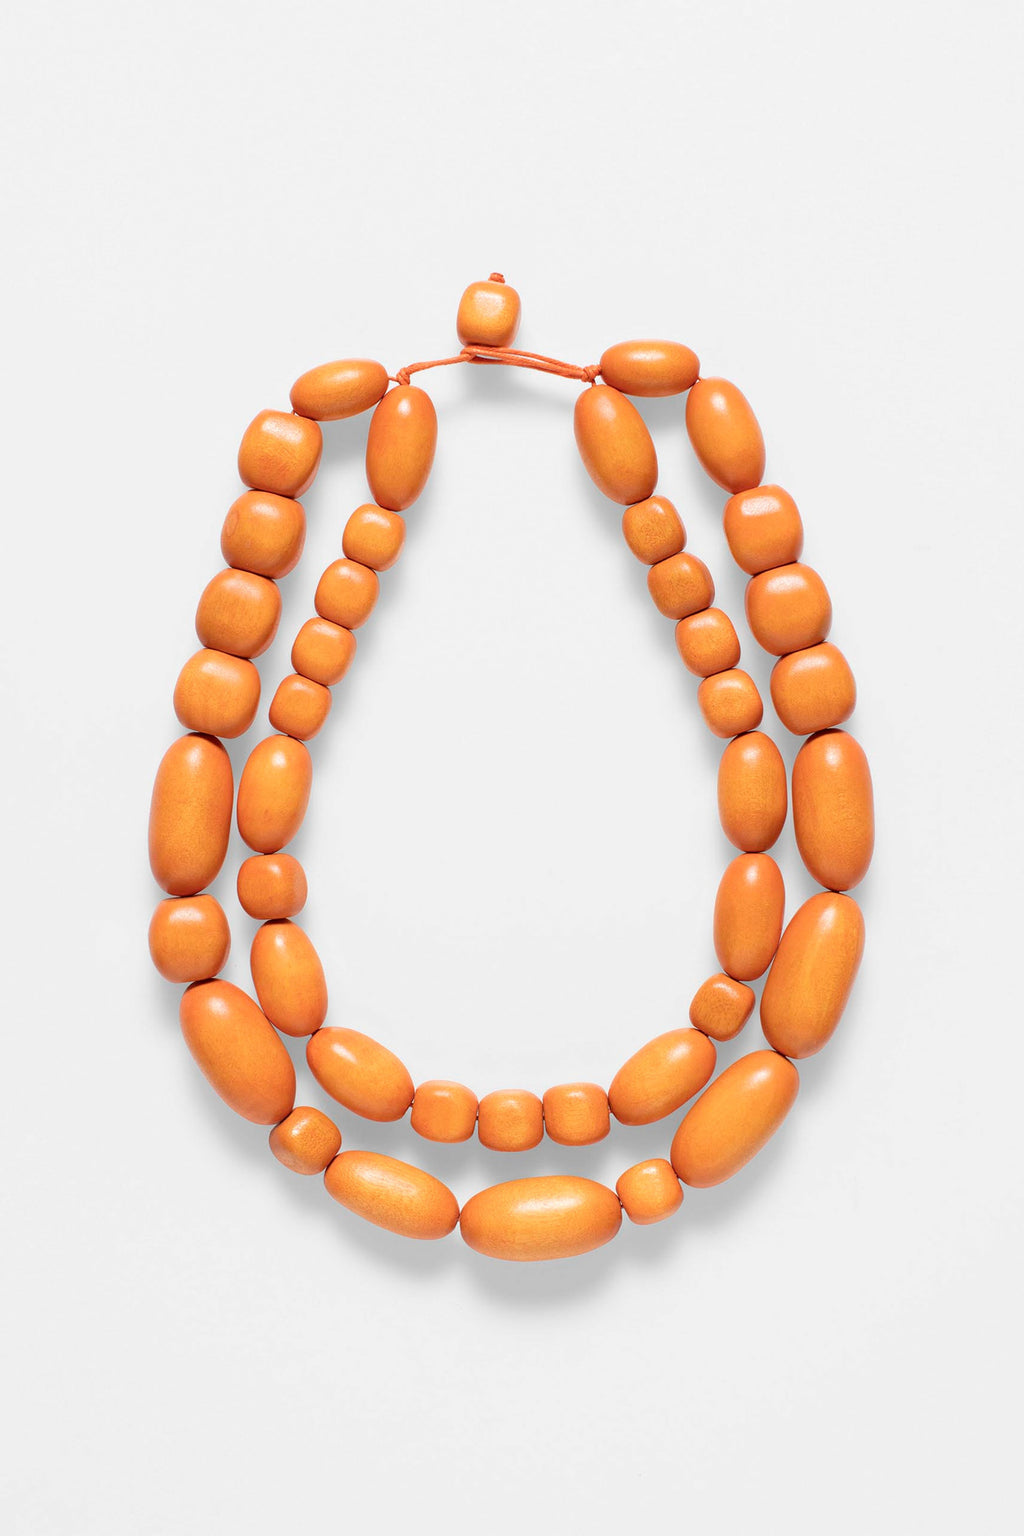 Harno Necklace in Tangerine by Elk the Label